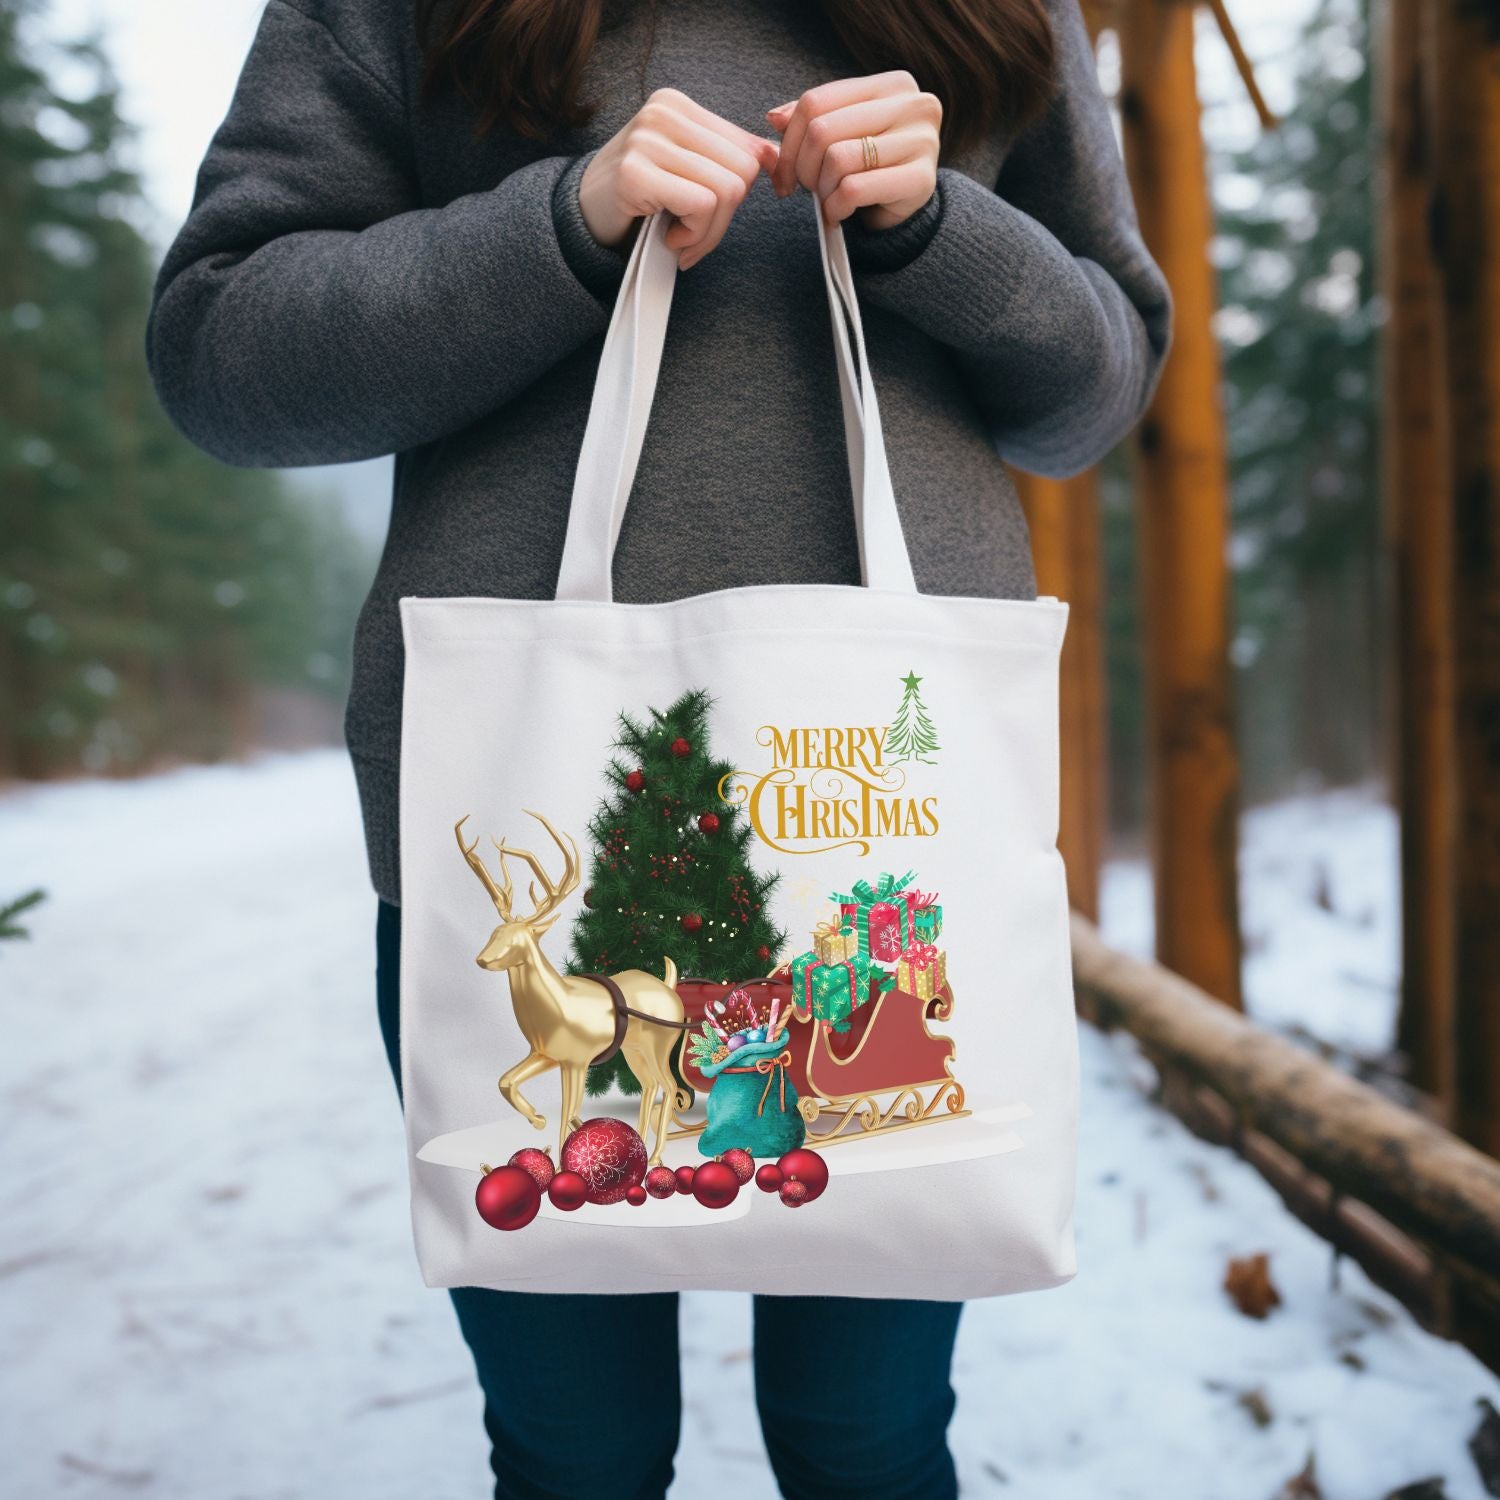 Christmas Tote Bag | Family Gift | Reindeer Stylish Holiday Carryall Accessories   